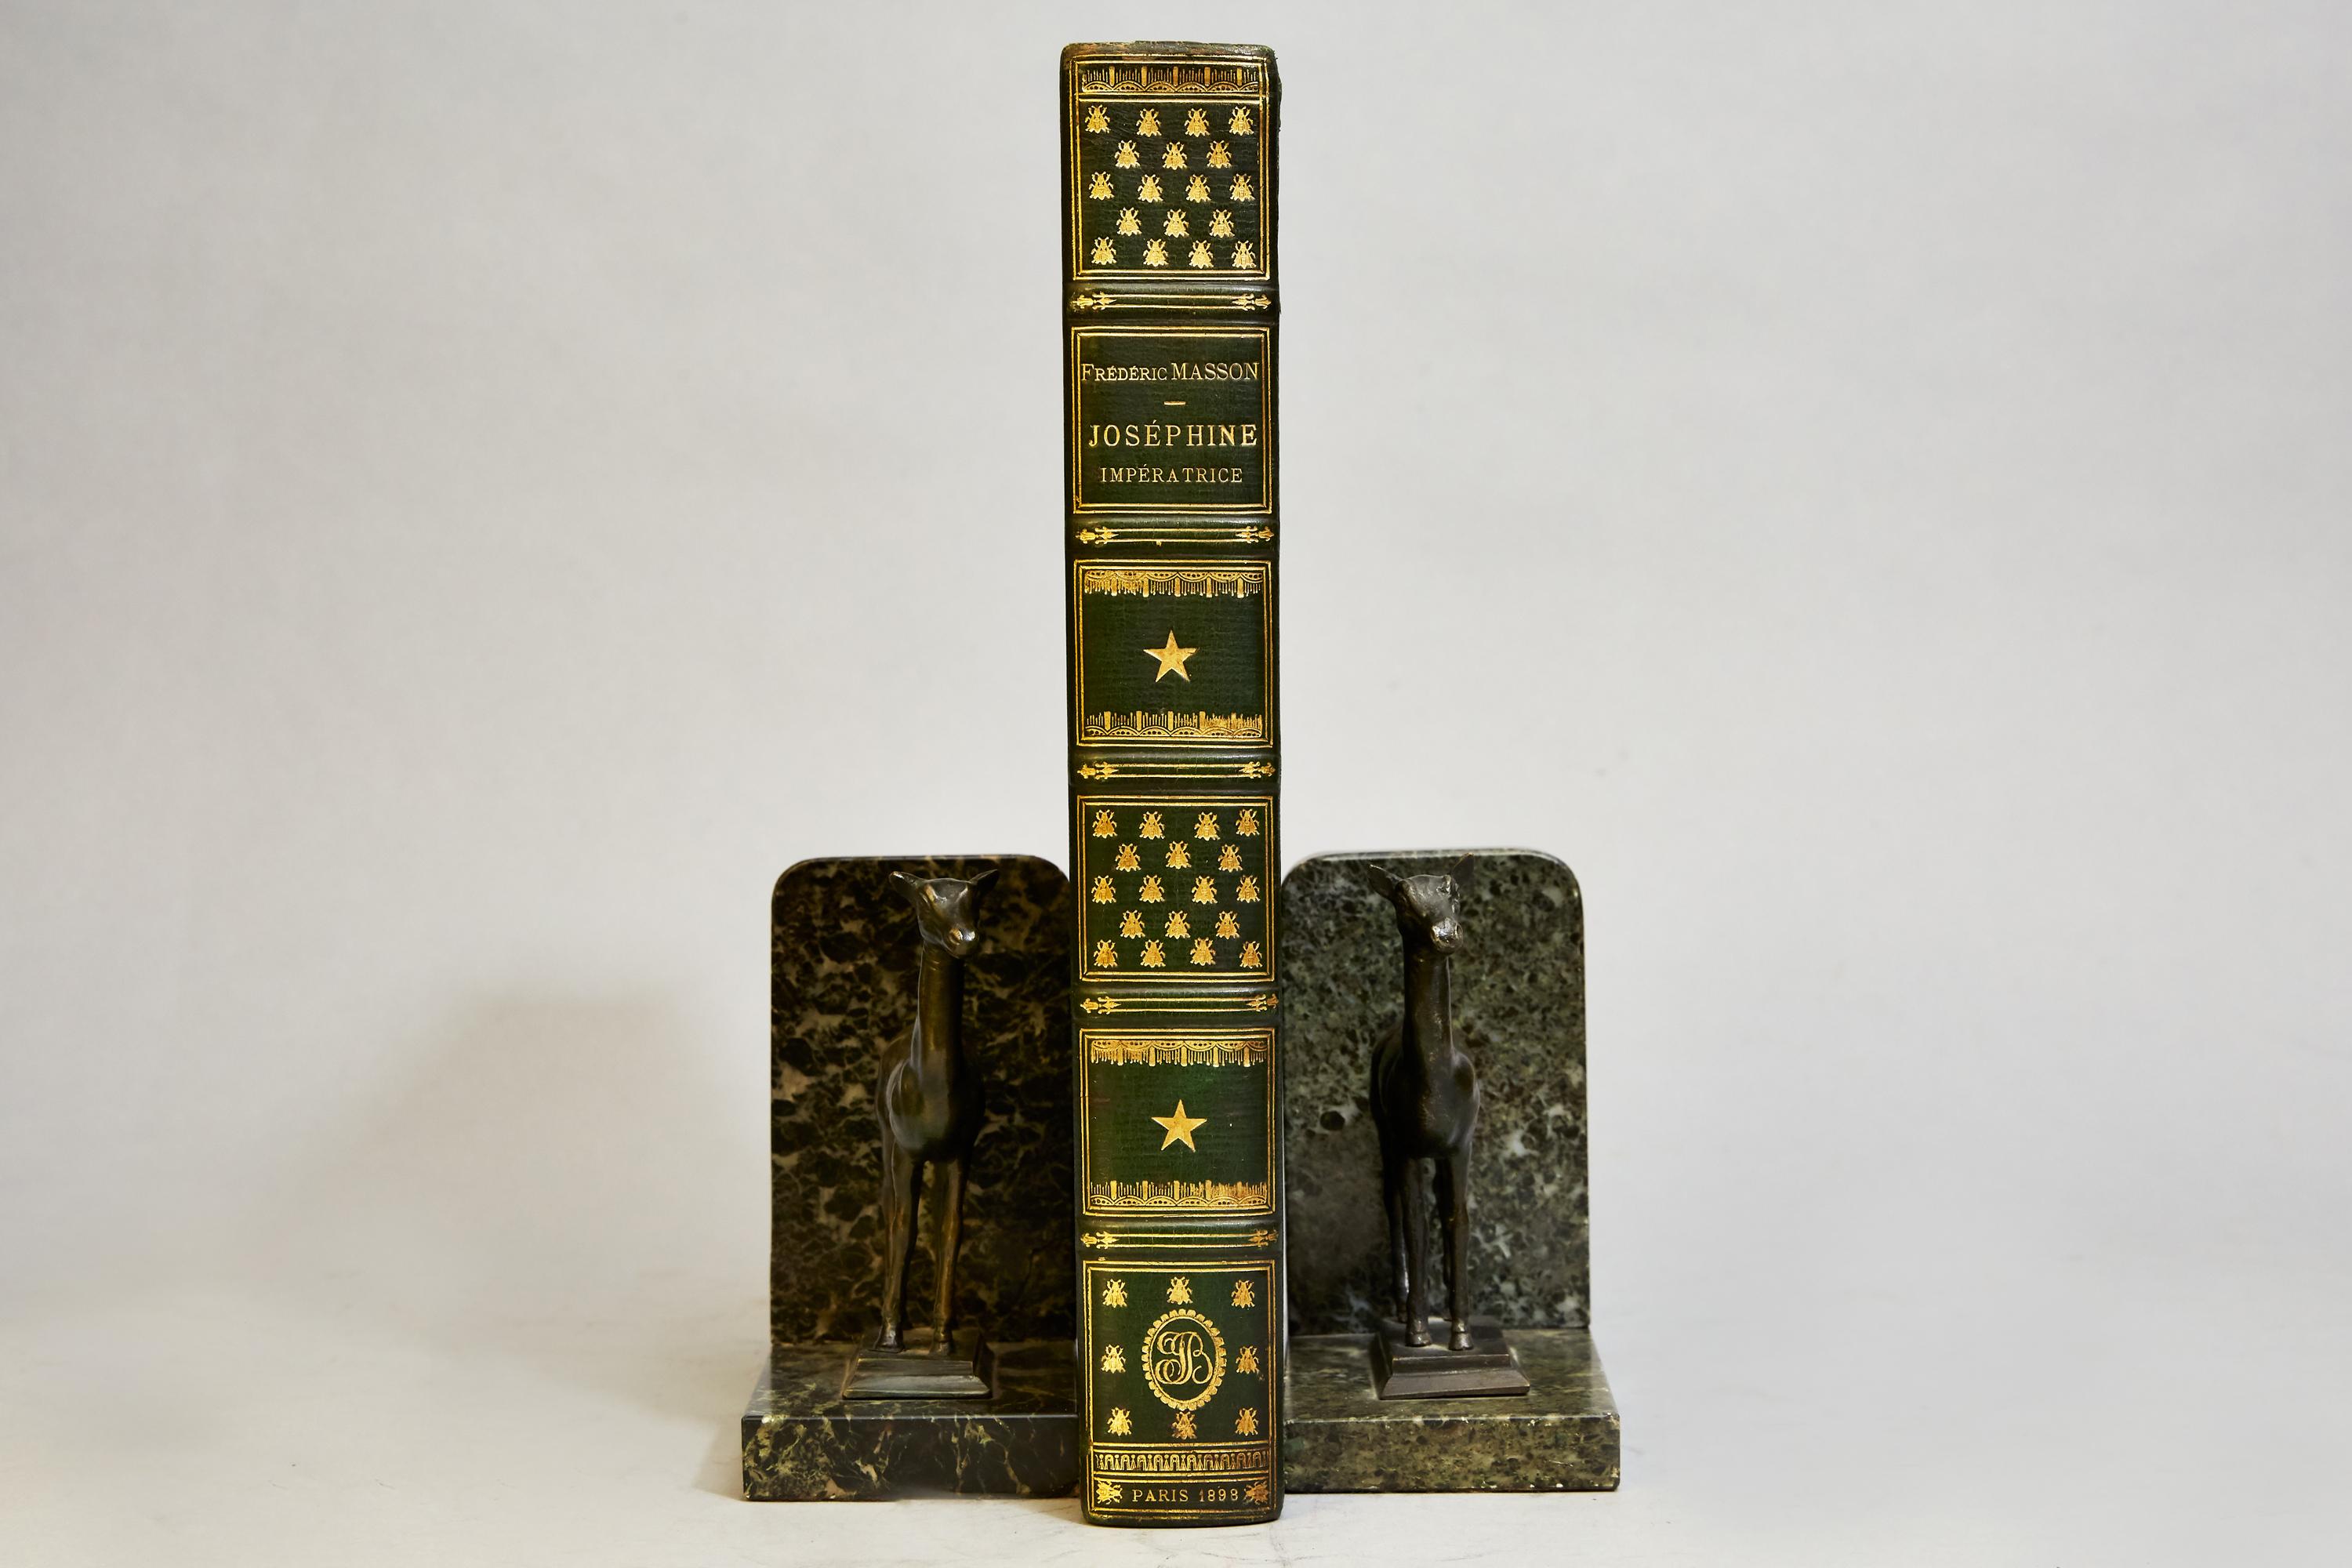 Frédéric Masson (1847-1923) was a French historian and academician best known for his books on Napoleon I.

One volume. Quarto exquisitely bound in full green morocco leather by Durvand. With all edges gilt, raised bands on spine, intricate and